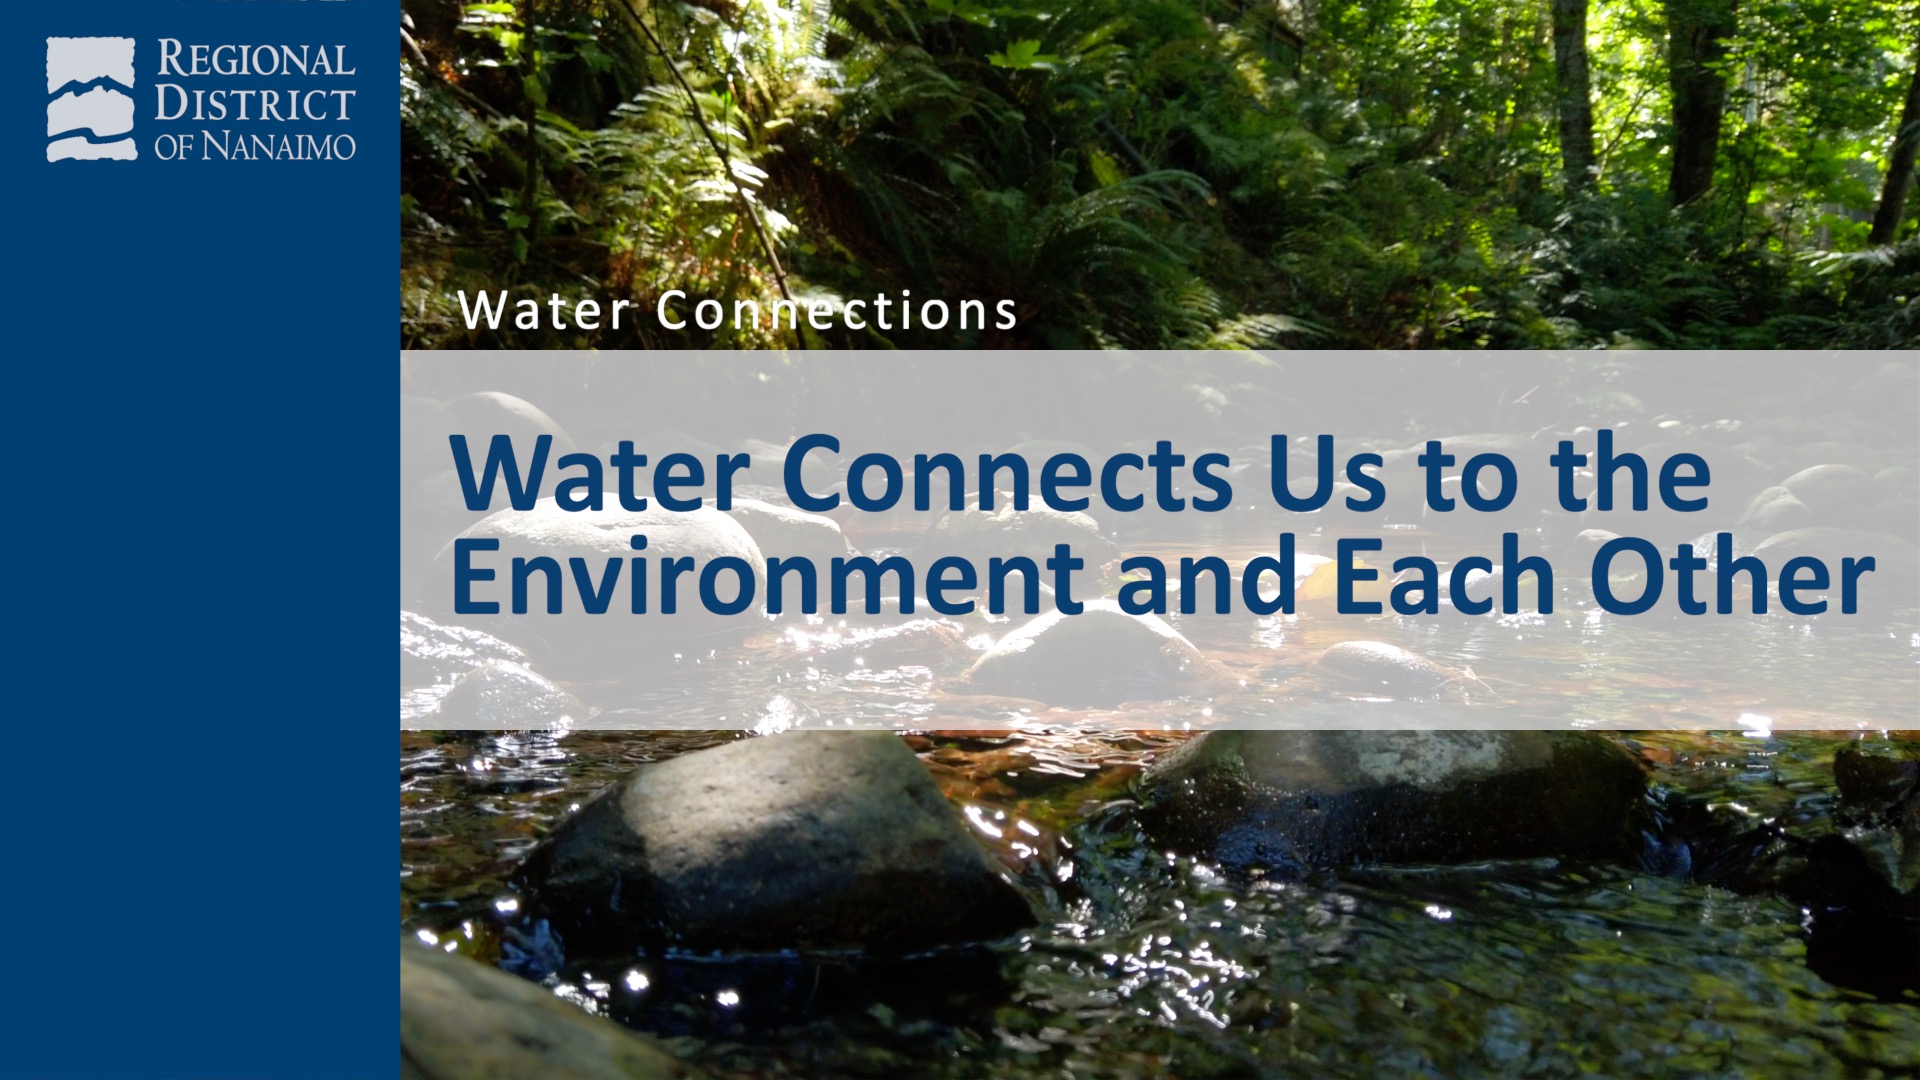 Video 3 - Water Connections